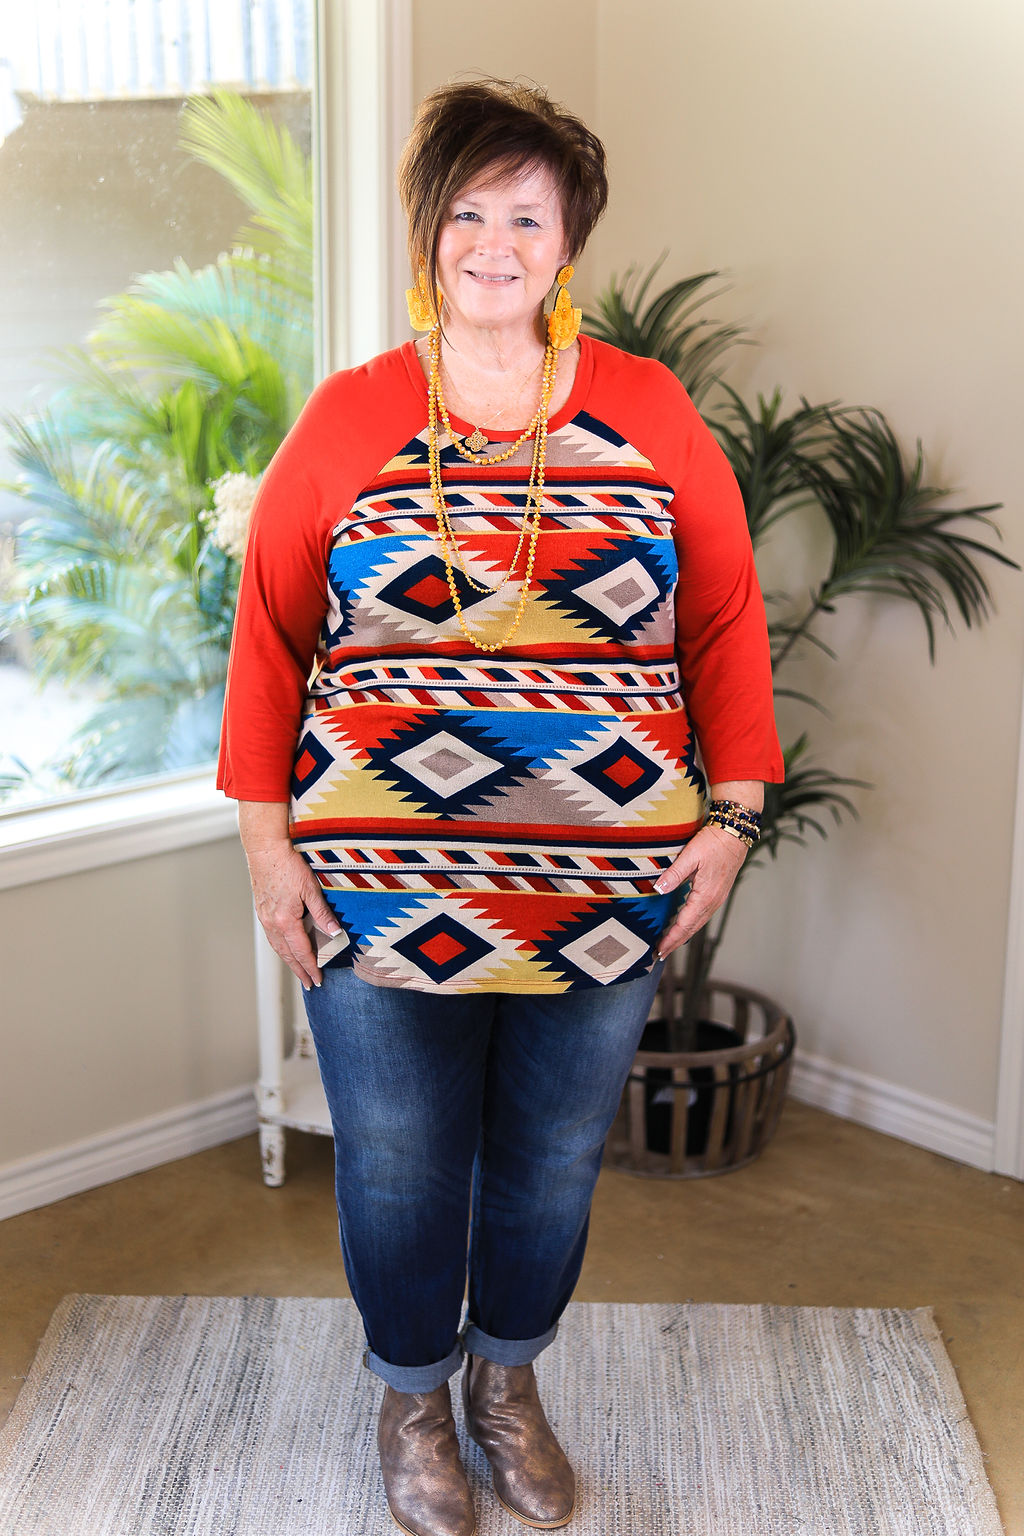 Last Chance Size Small & Medium | Make You Miss Me Aztec Top with 3/4 Sleeves in Rust Orange - Giddy Up Glamour Boutique